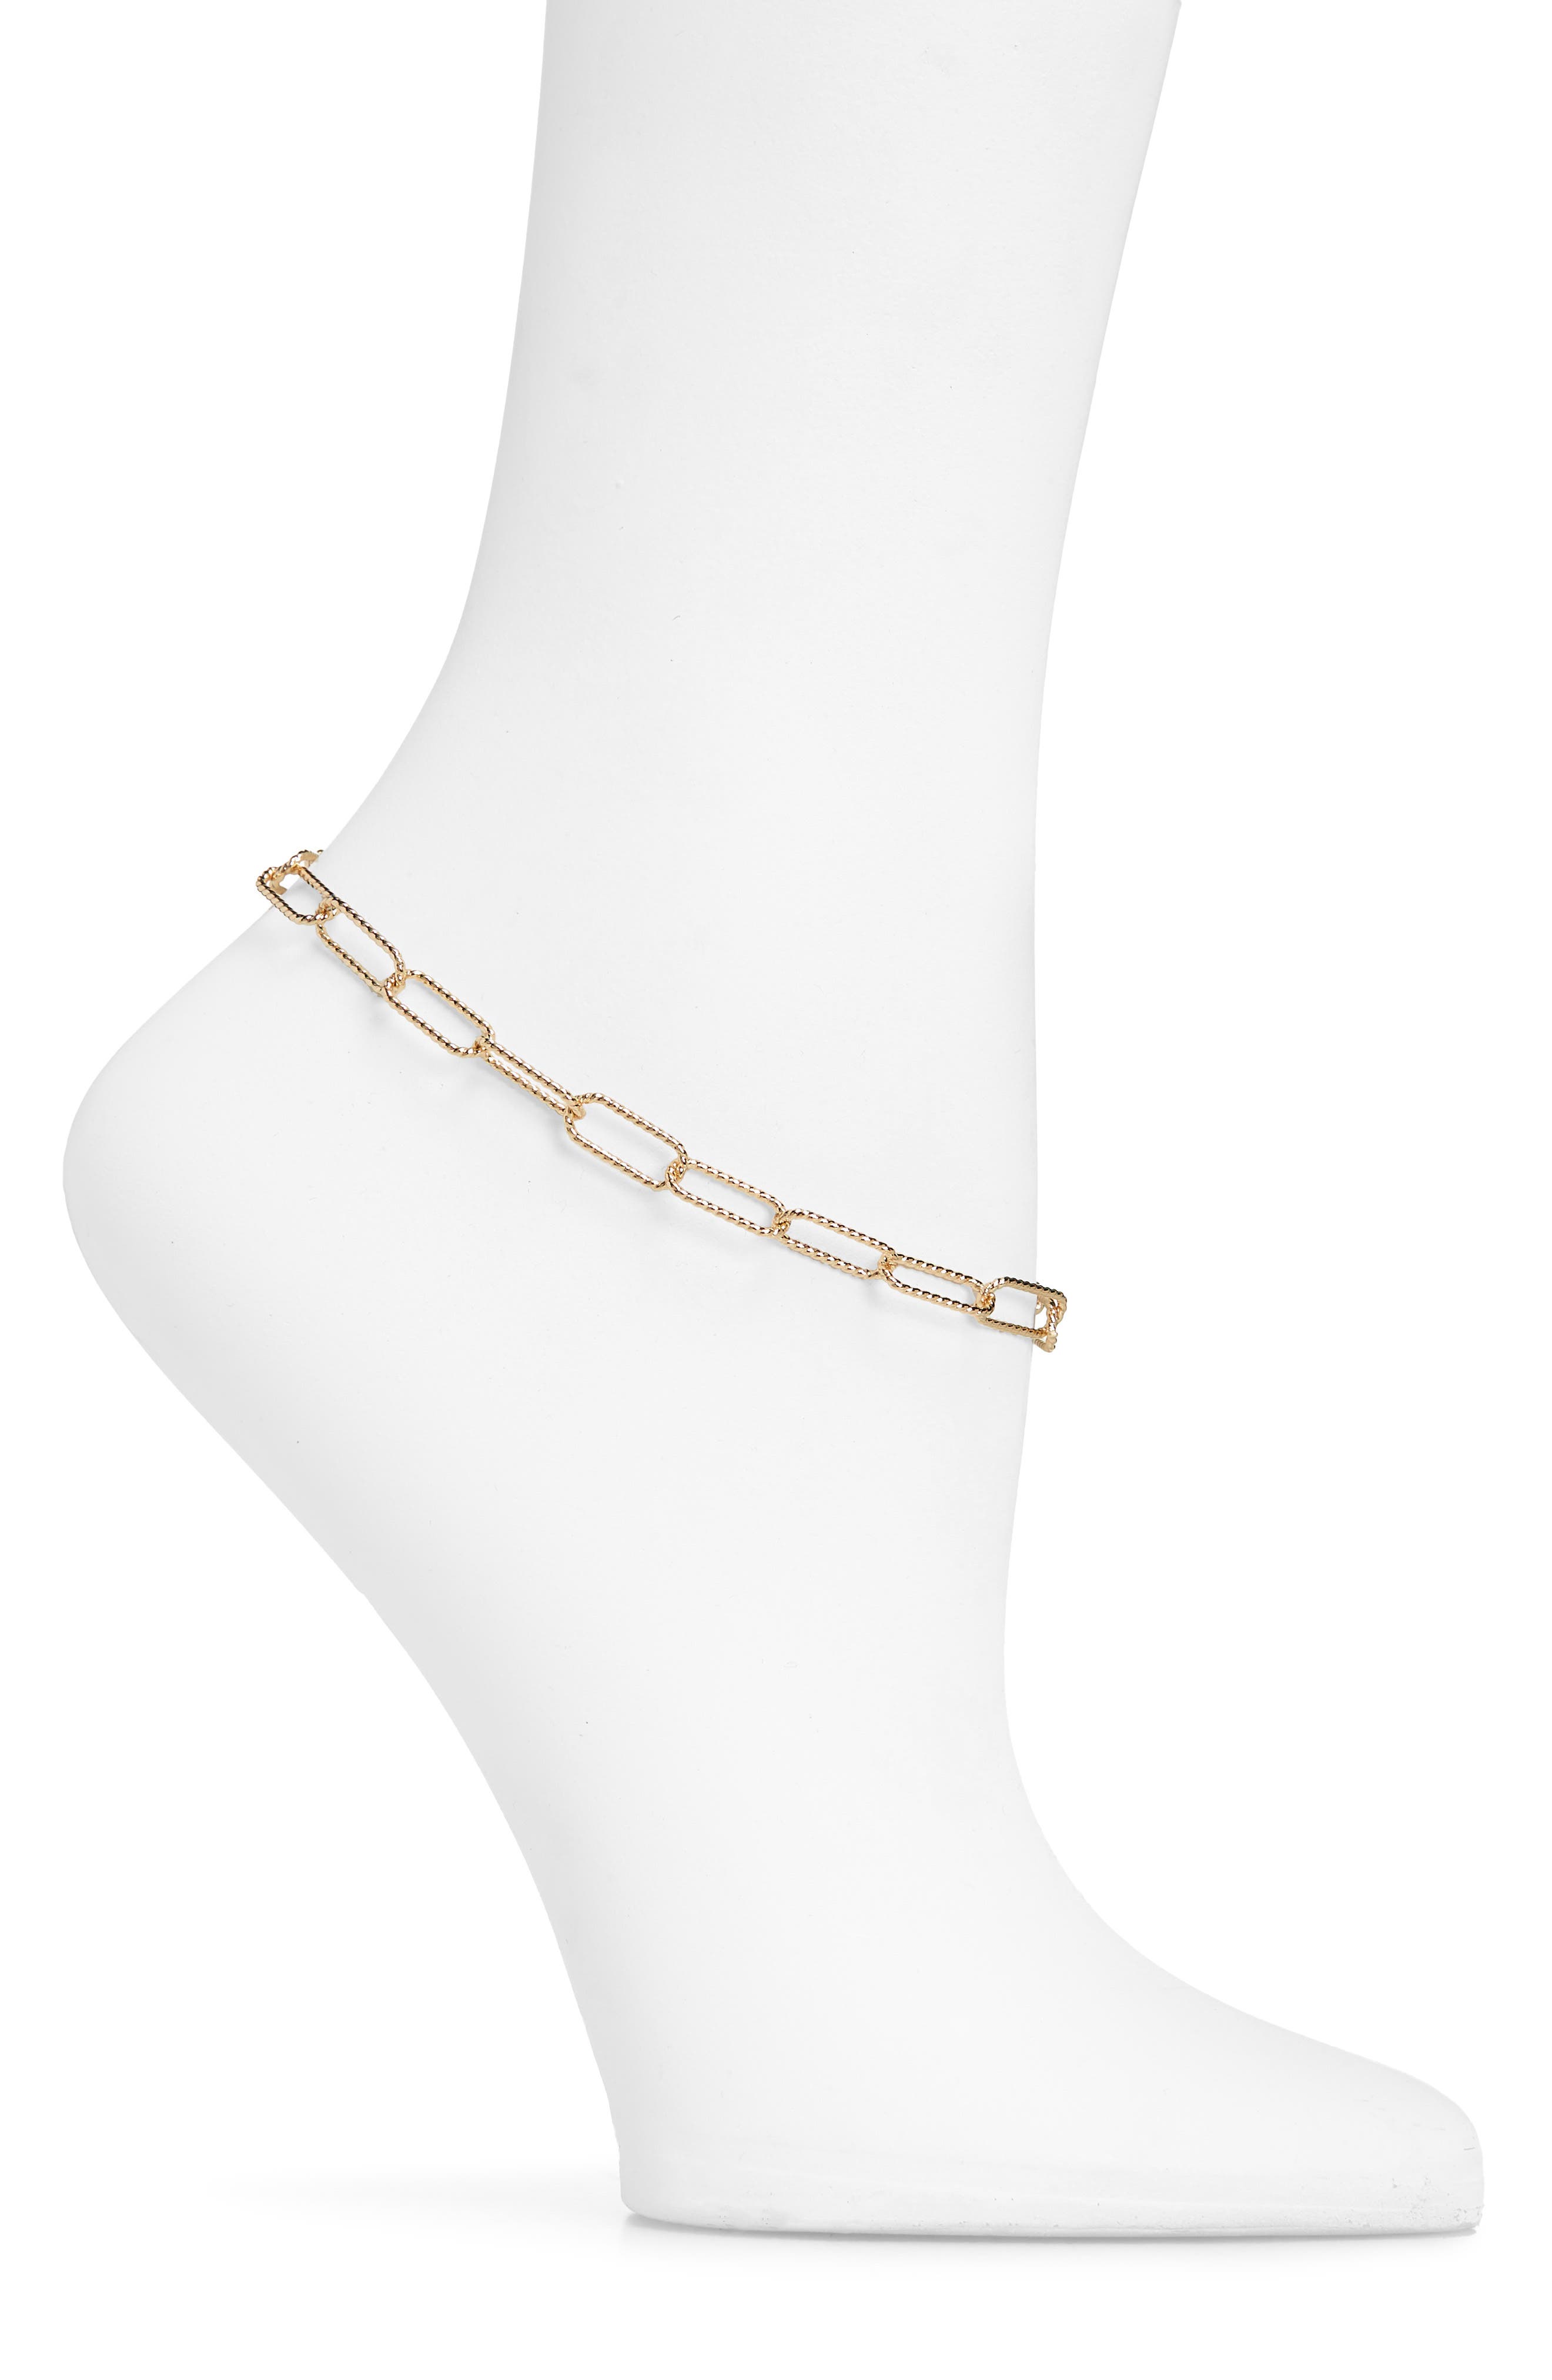 Laura Lombardi Rosa Anklet in Brass at Nordstrom, Size 9 Us